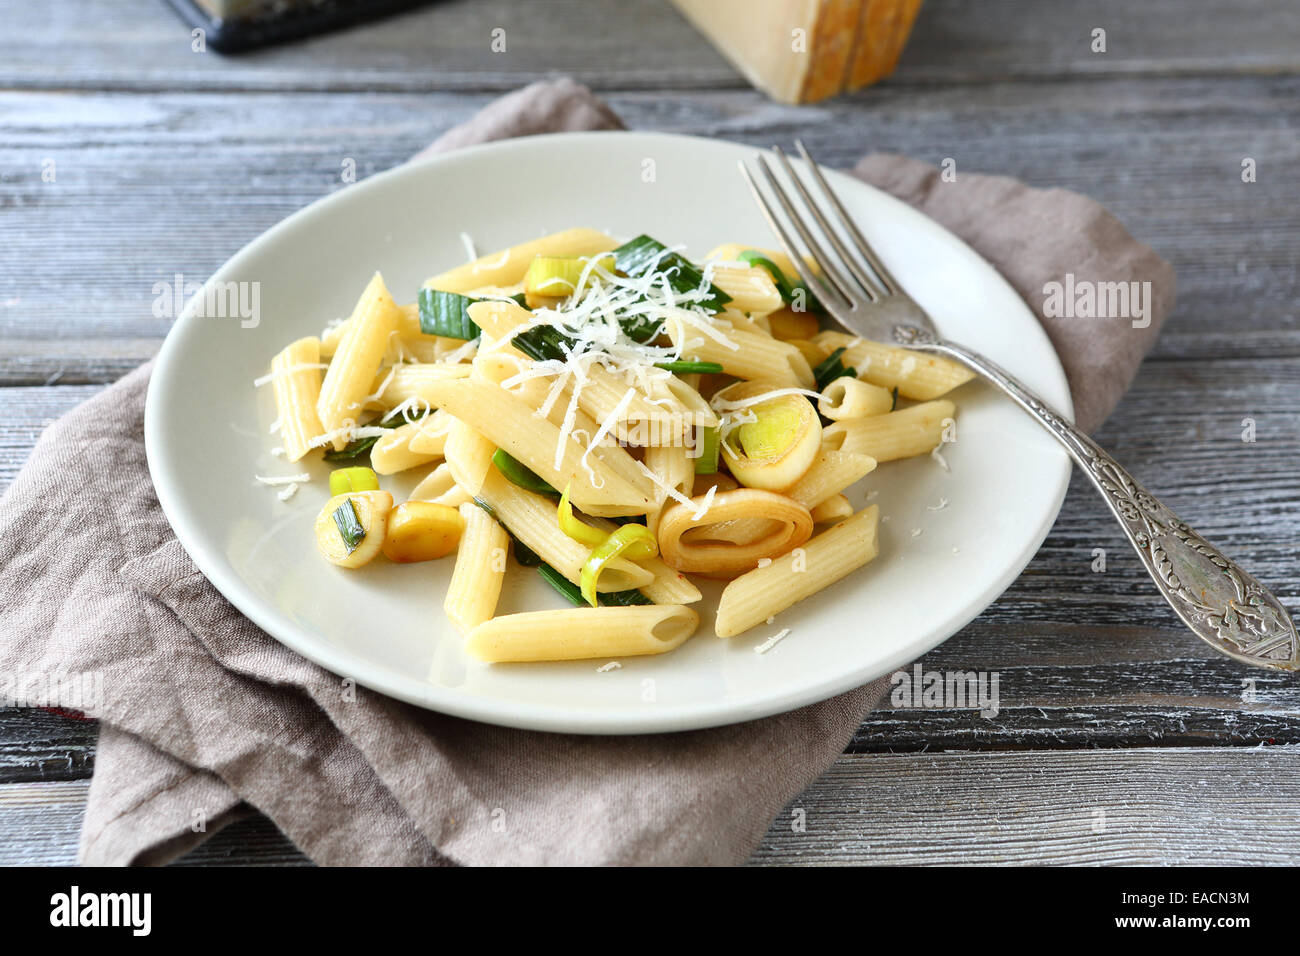 Tasty pasta with cheese and onions on a white plate, italian food Stock Photo